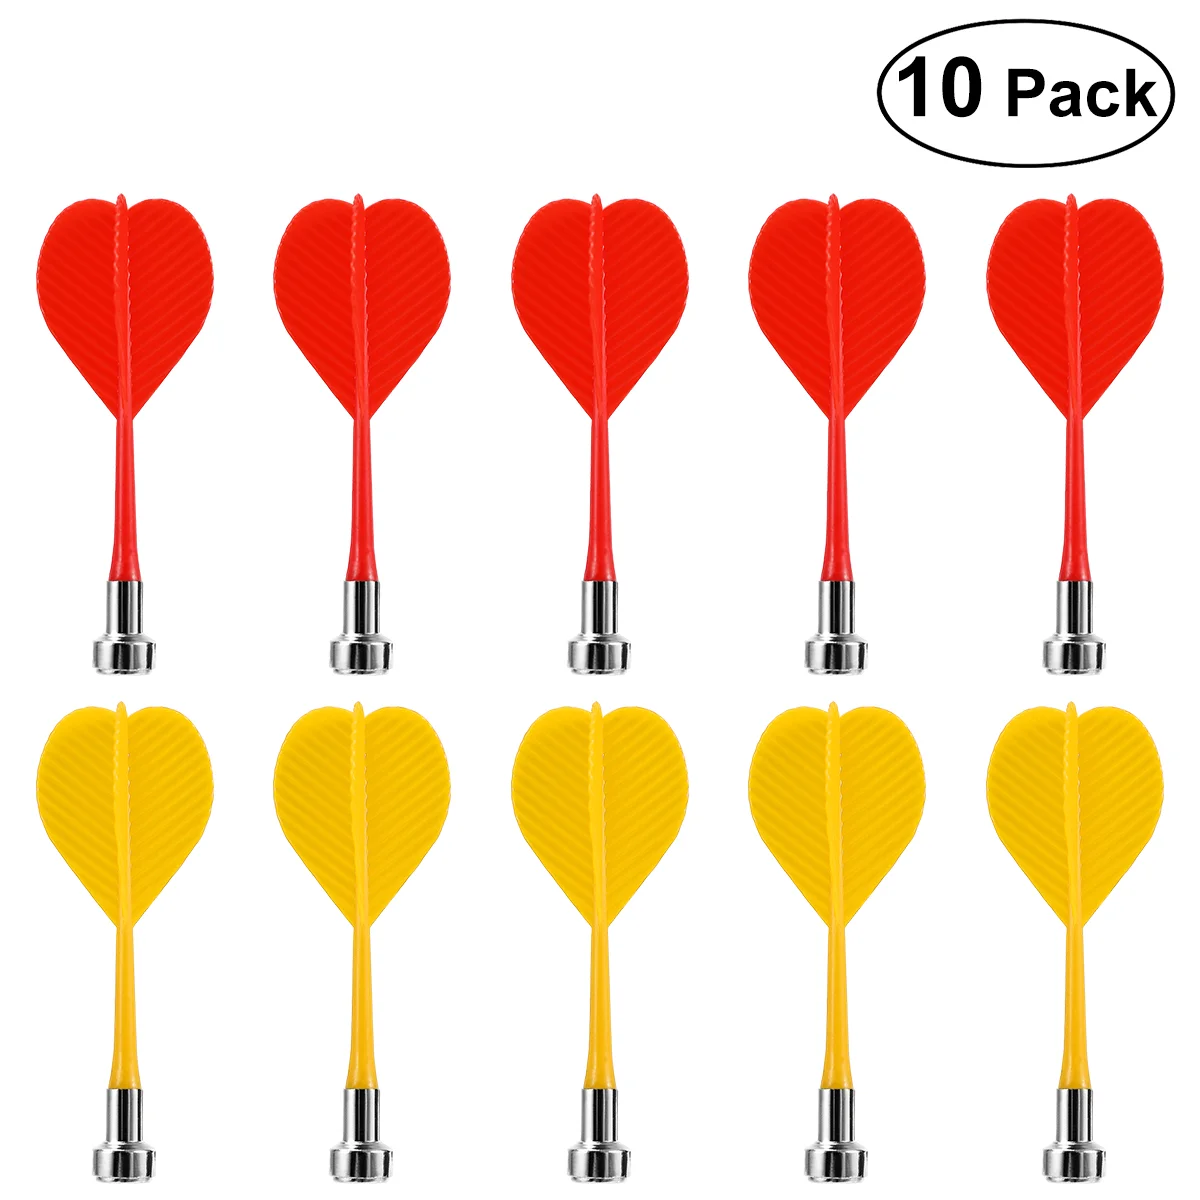 NUOLUX 10pcs Replacement Durable Safe Plastic Wing Magnetic Darts Bullseye Game Toys (Red & Yellow) china factory safe and durable anti leakage nozzle surfing wing foil